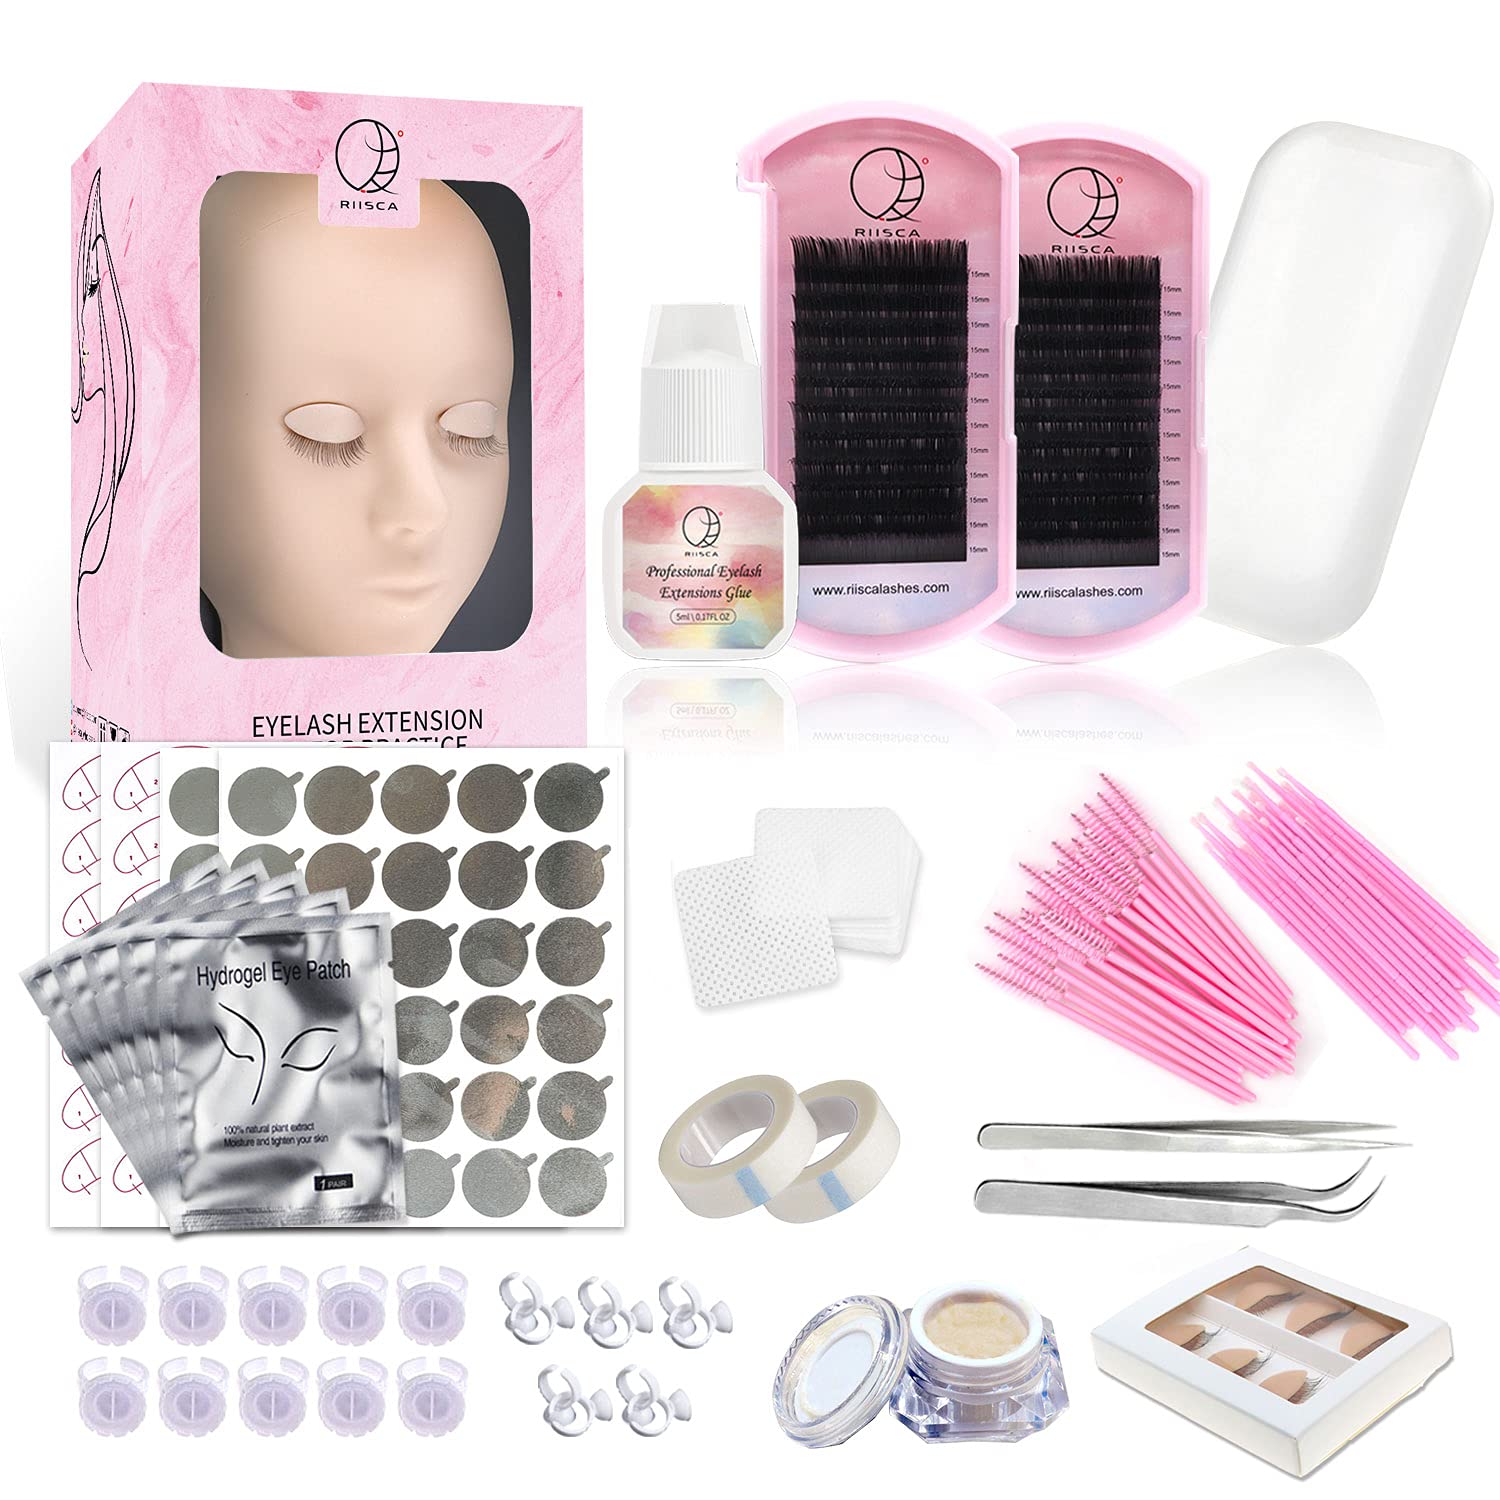 RIISCA Eyelash Extension Kit,Mannequin Head With Replaced Eyelids ...